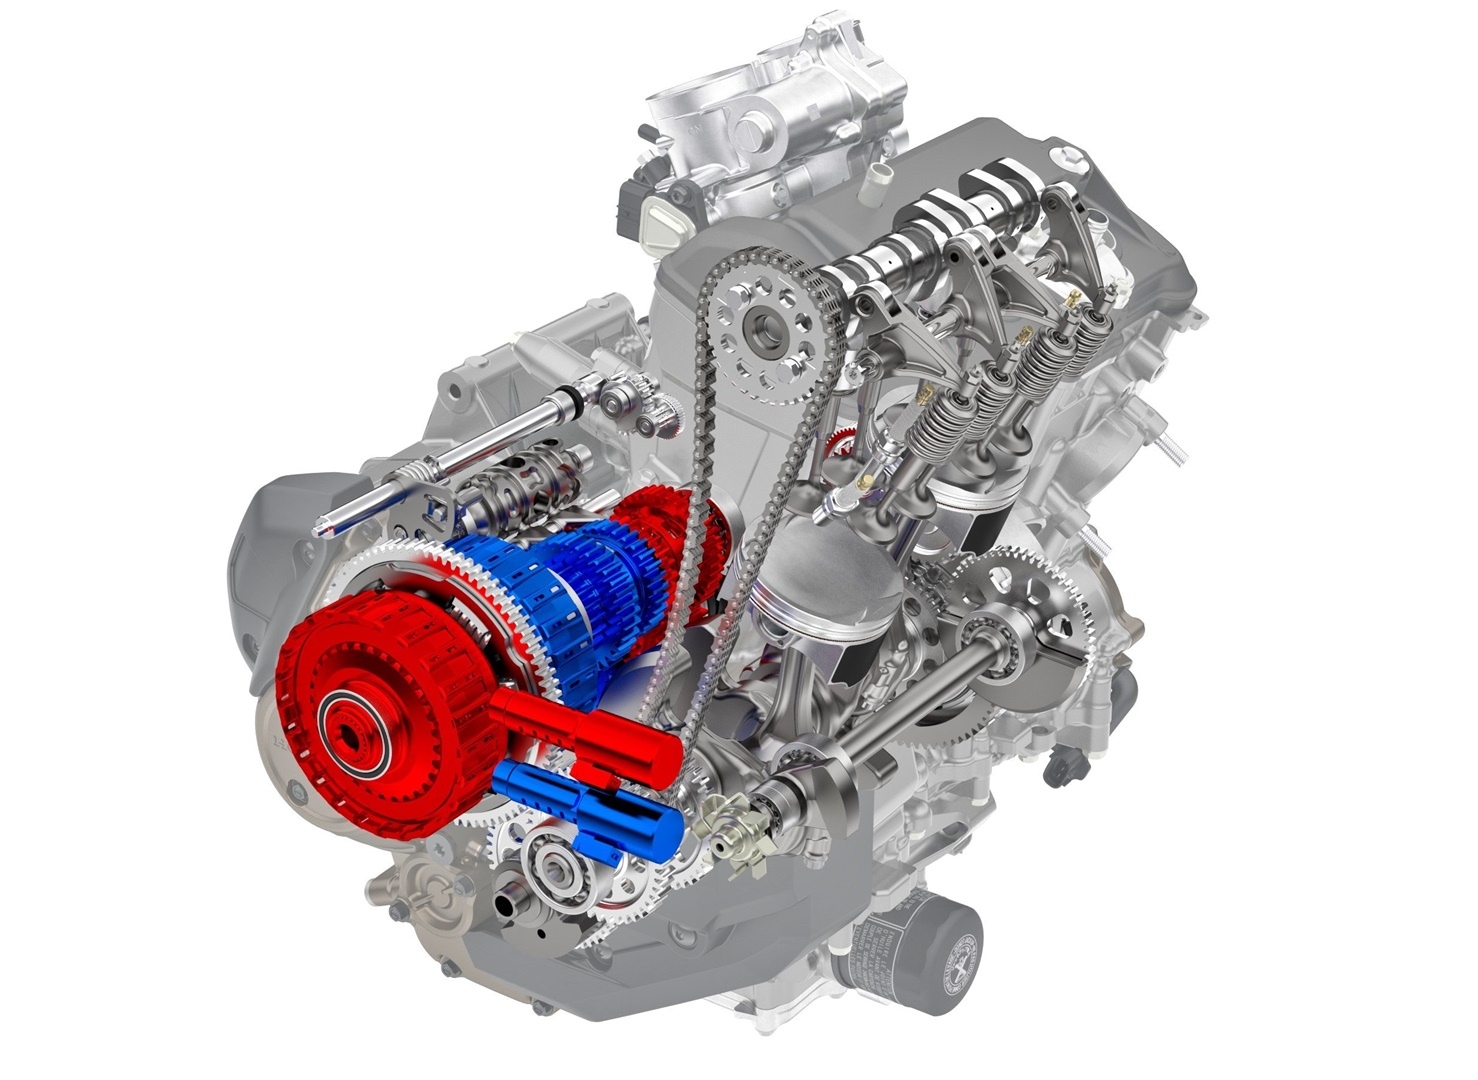 305925 Honda reaches ten years of production of Dual Clutch Transmission